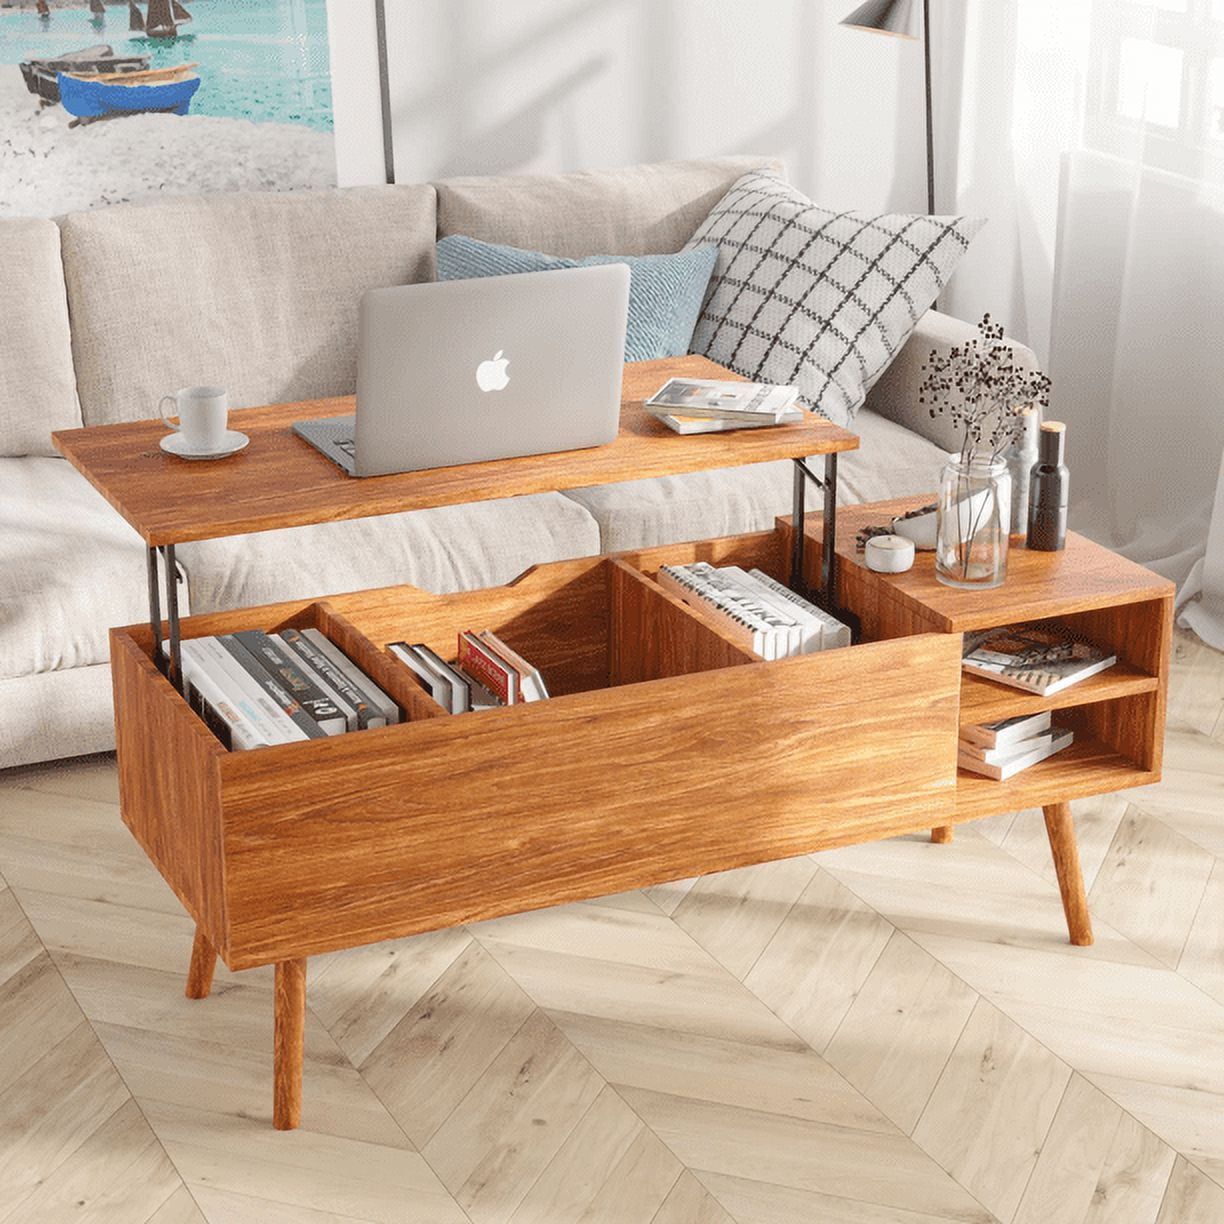 Modern Lift Top Coffee Table With Hidden Compartment Storage,adjustable Wood  Table For Living Room,brown – Walmart Regarding Modern Wooden Lift Top Tables (Photo 1 of 15)